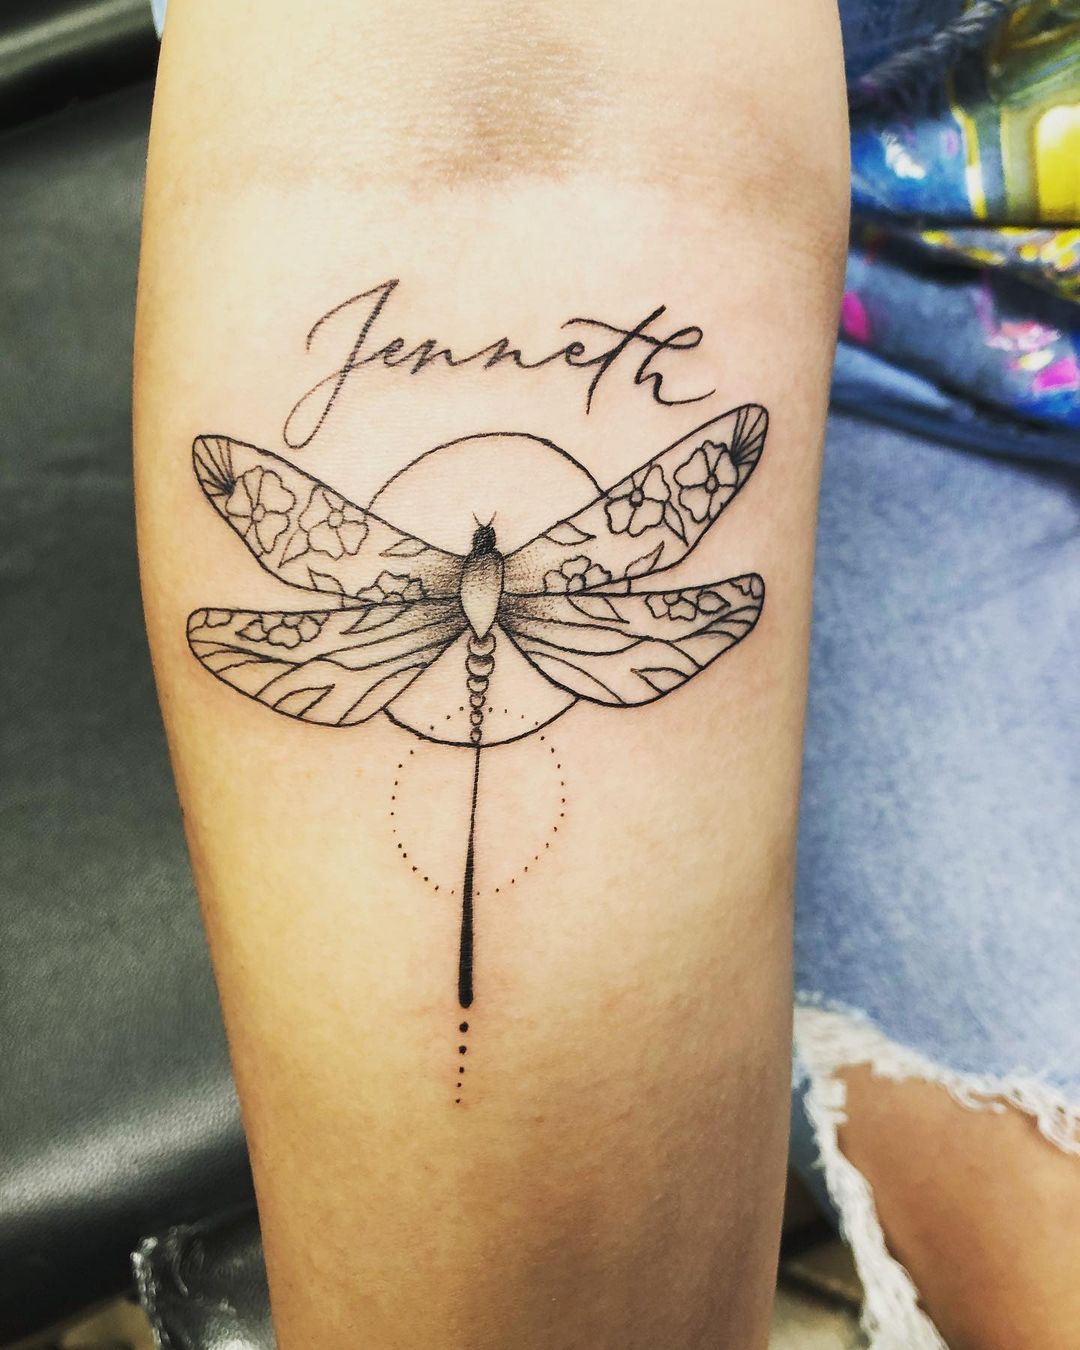 Nature Inspired Jenneth Name Tattoo With Dragonfly